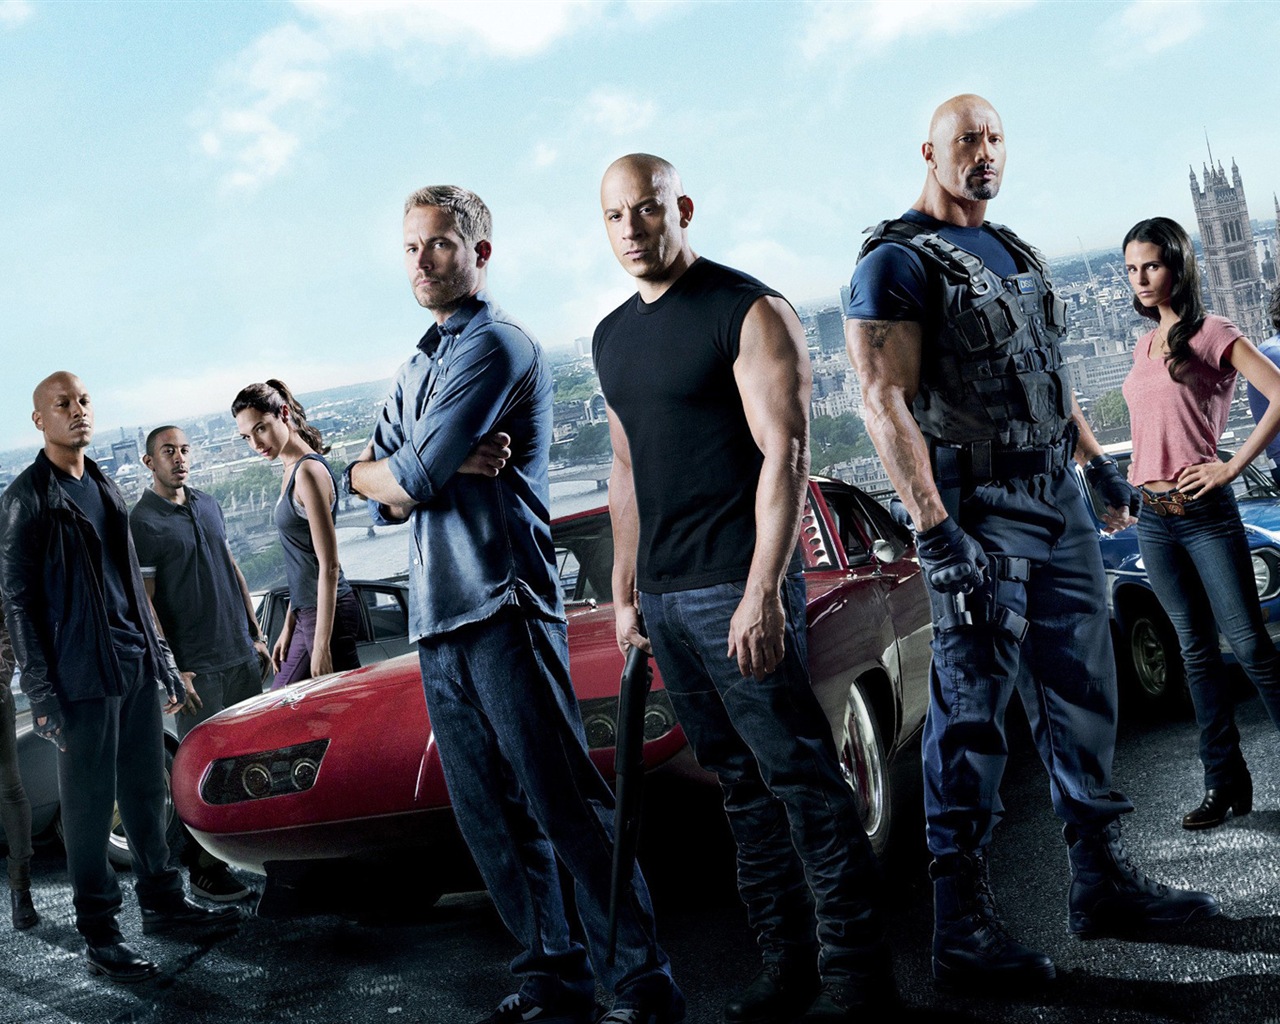 Fast And Furious 6 HD movie wallpapers #1 - 1280x1024